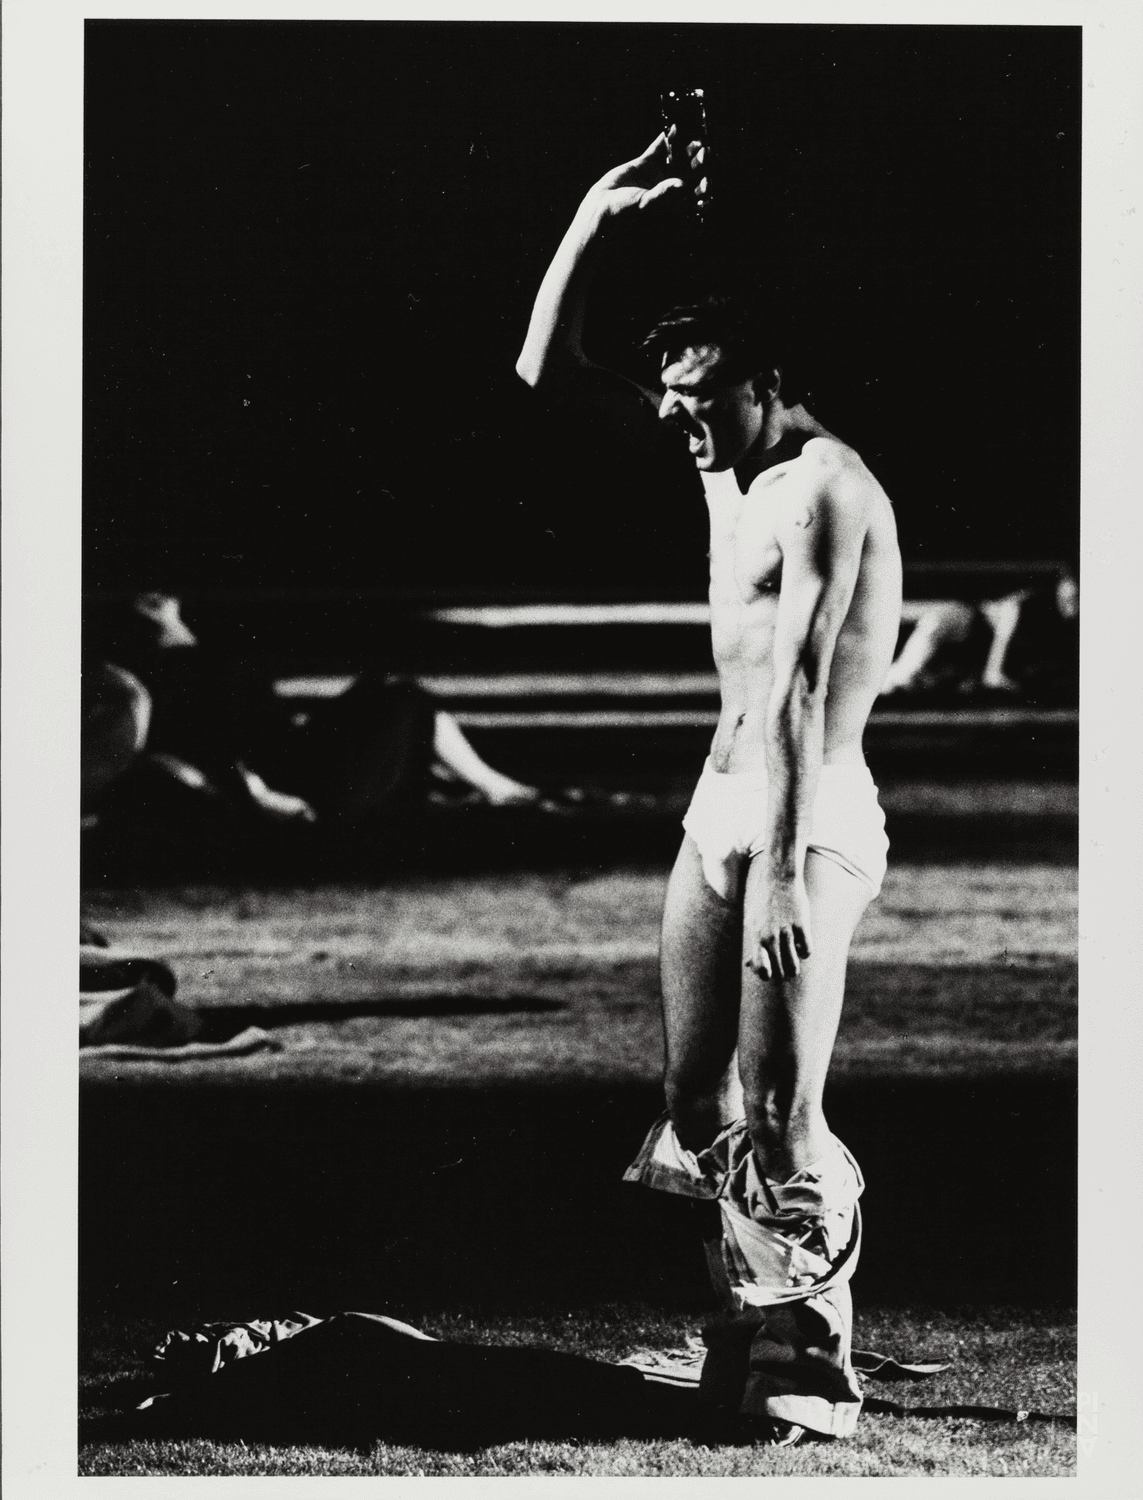 Antonio Carallo in “1980 – A Piece by Pina Bausch” by Pina Bausch